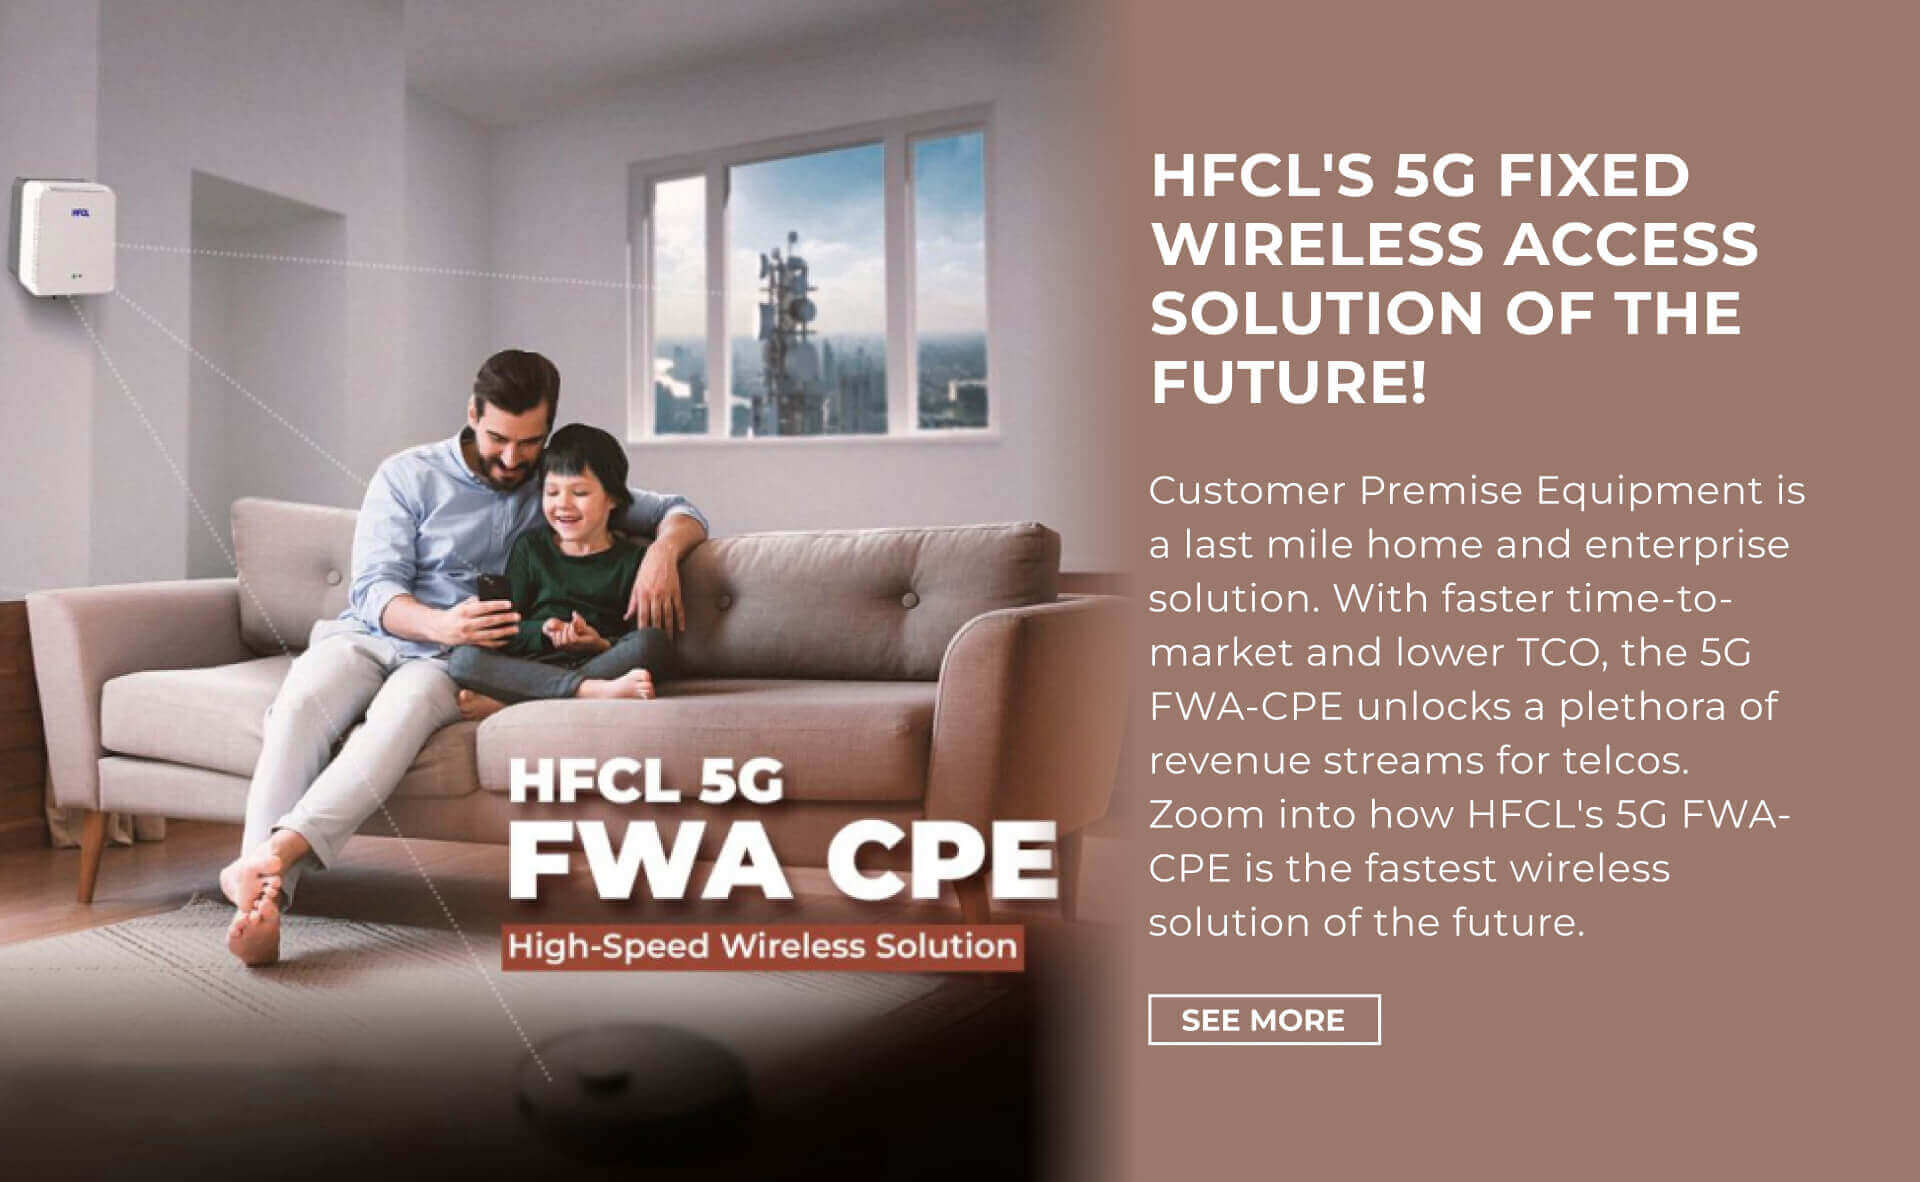 HFCL Drives Innovation Across the Telco Value Chain With Global Wins!